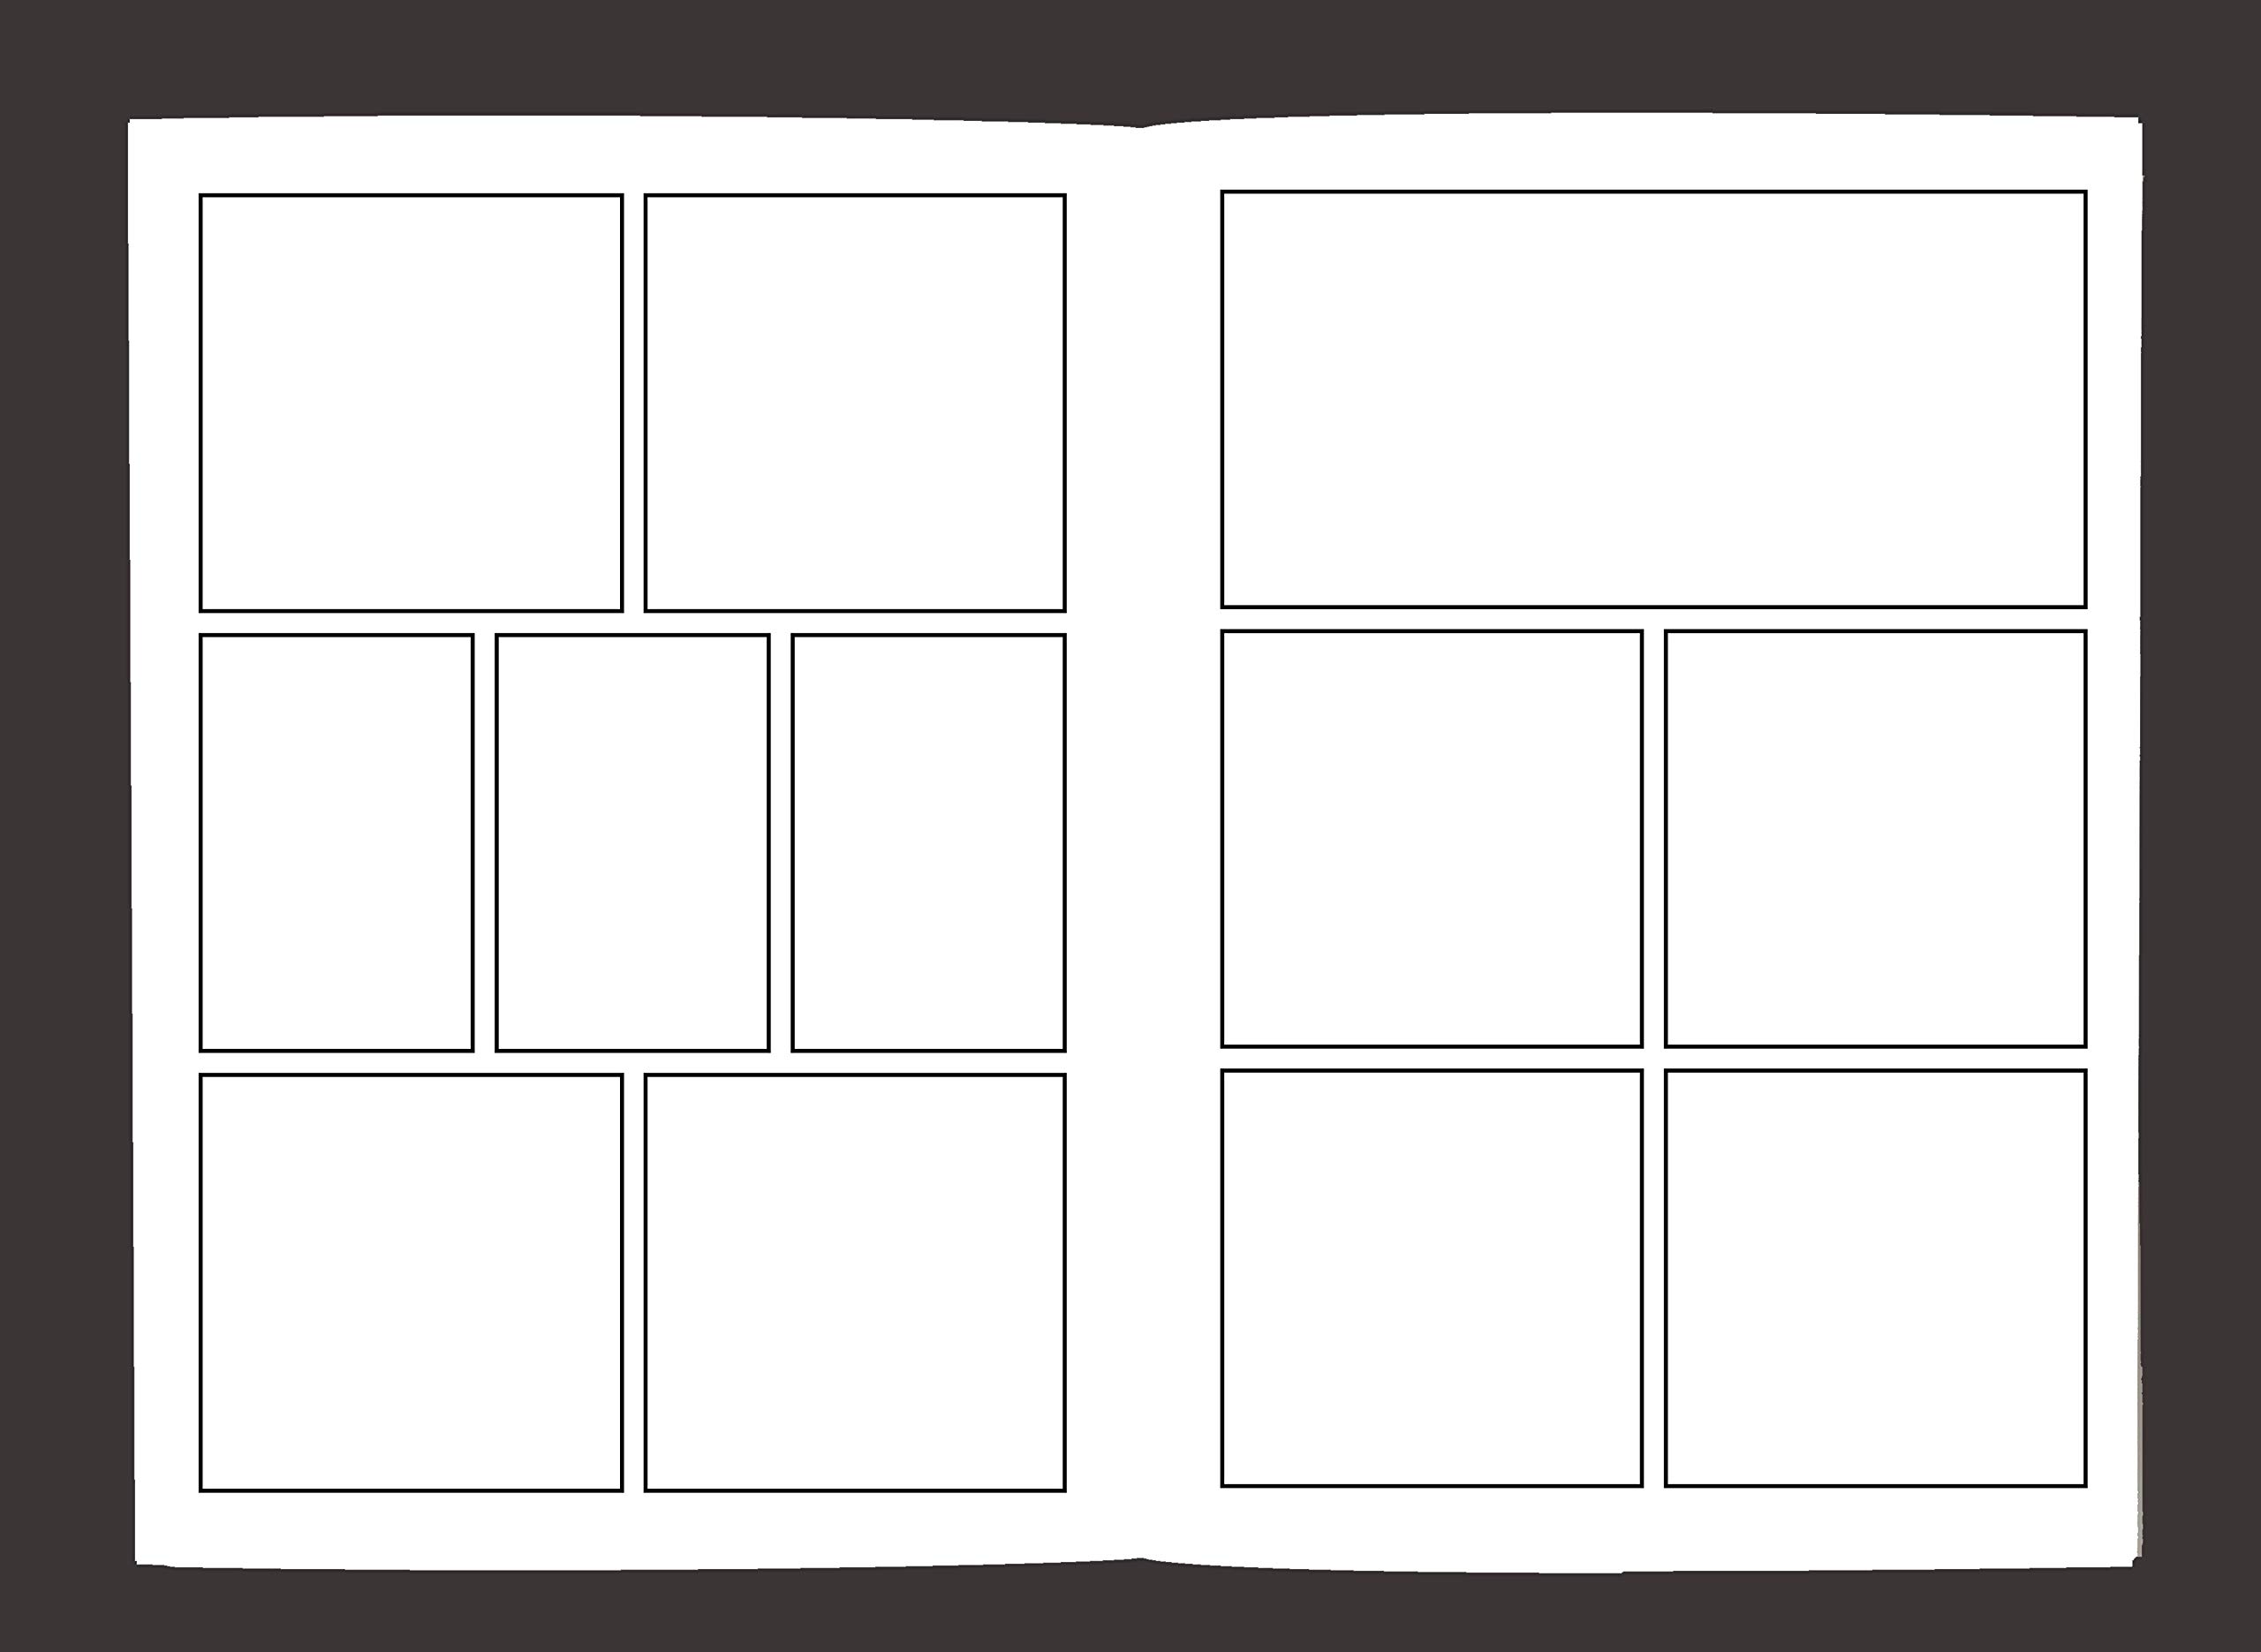 Blank Comic Book: Variety of Templates, 2-9 panel layouts, draw your own Comics